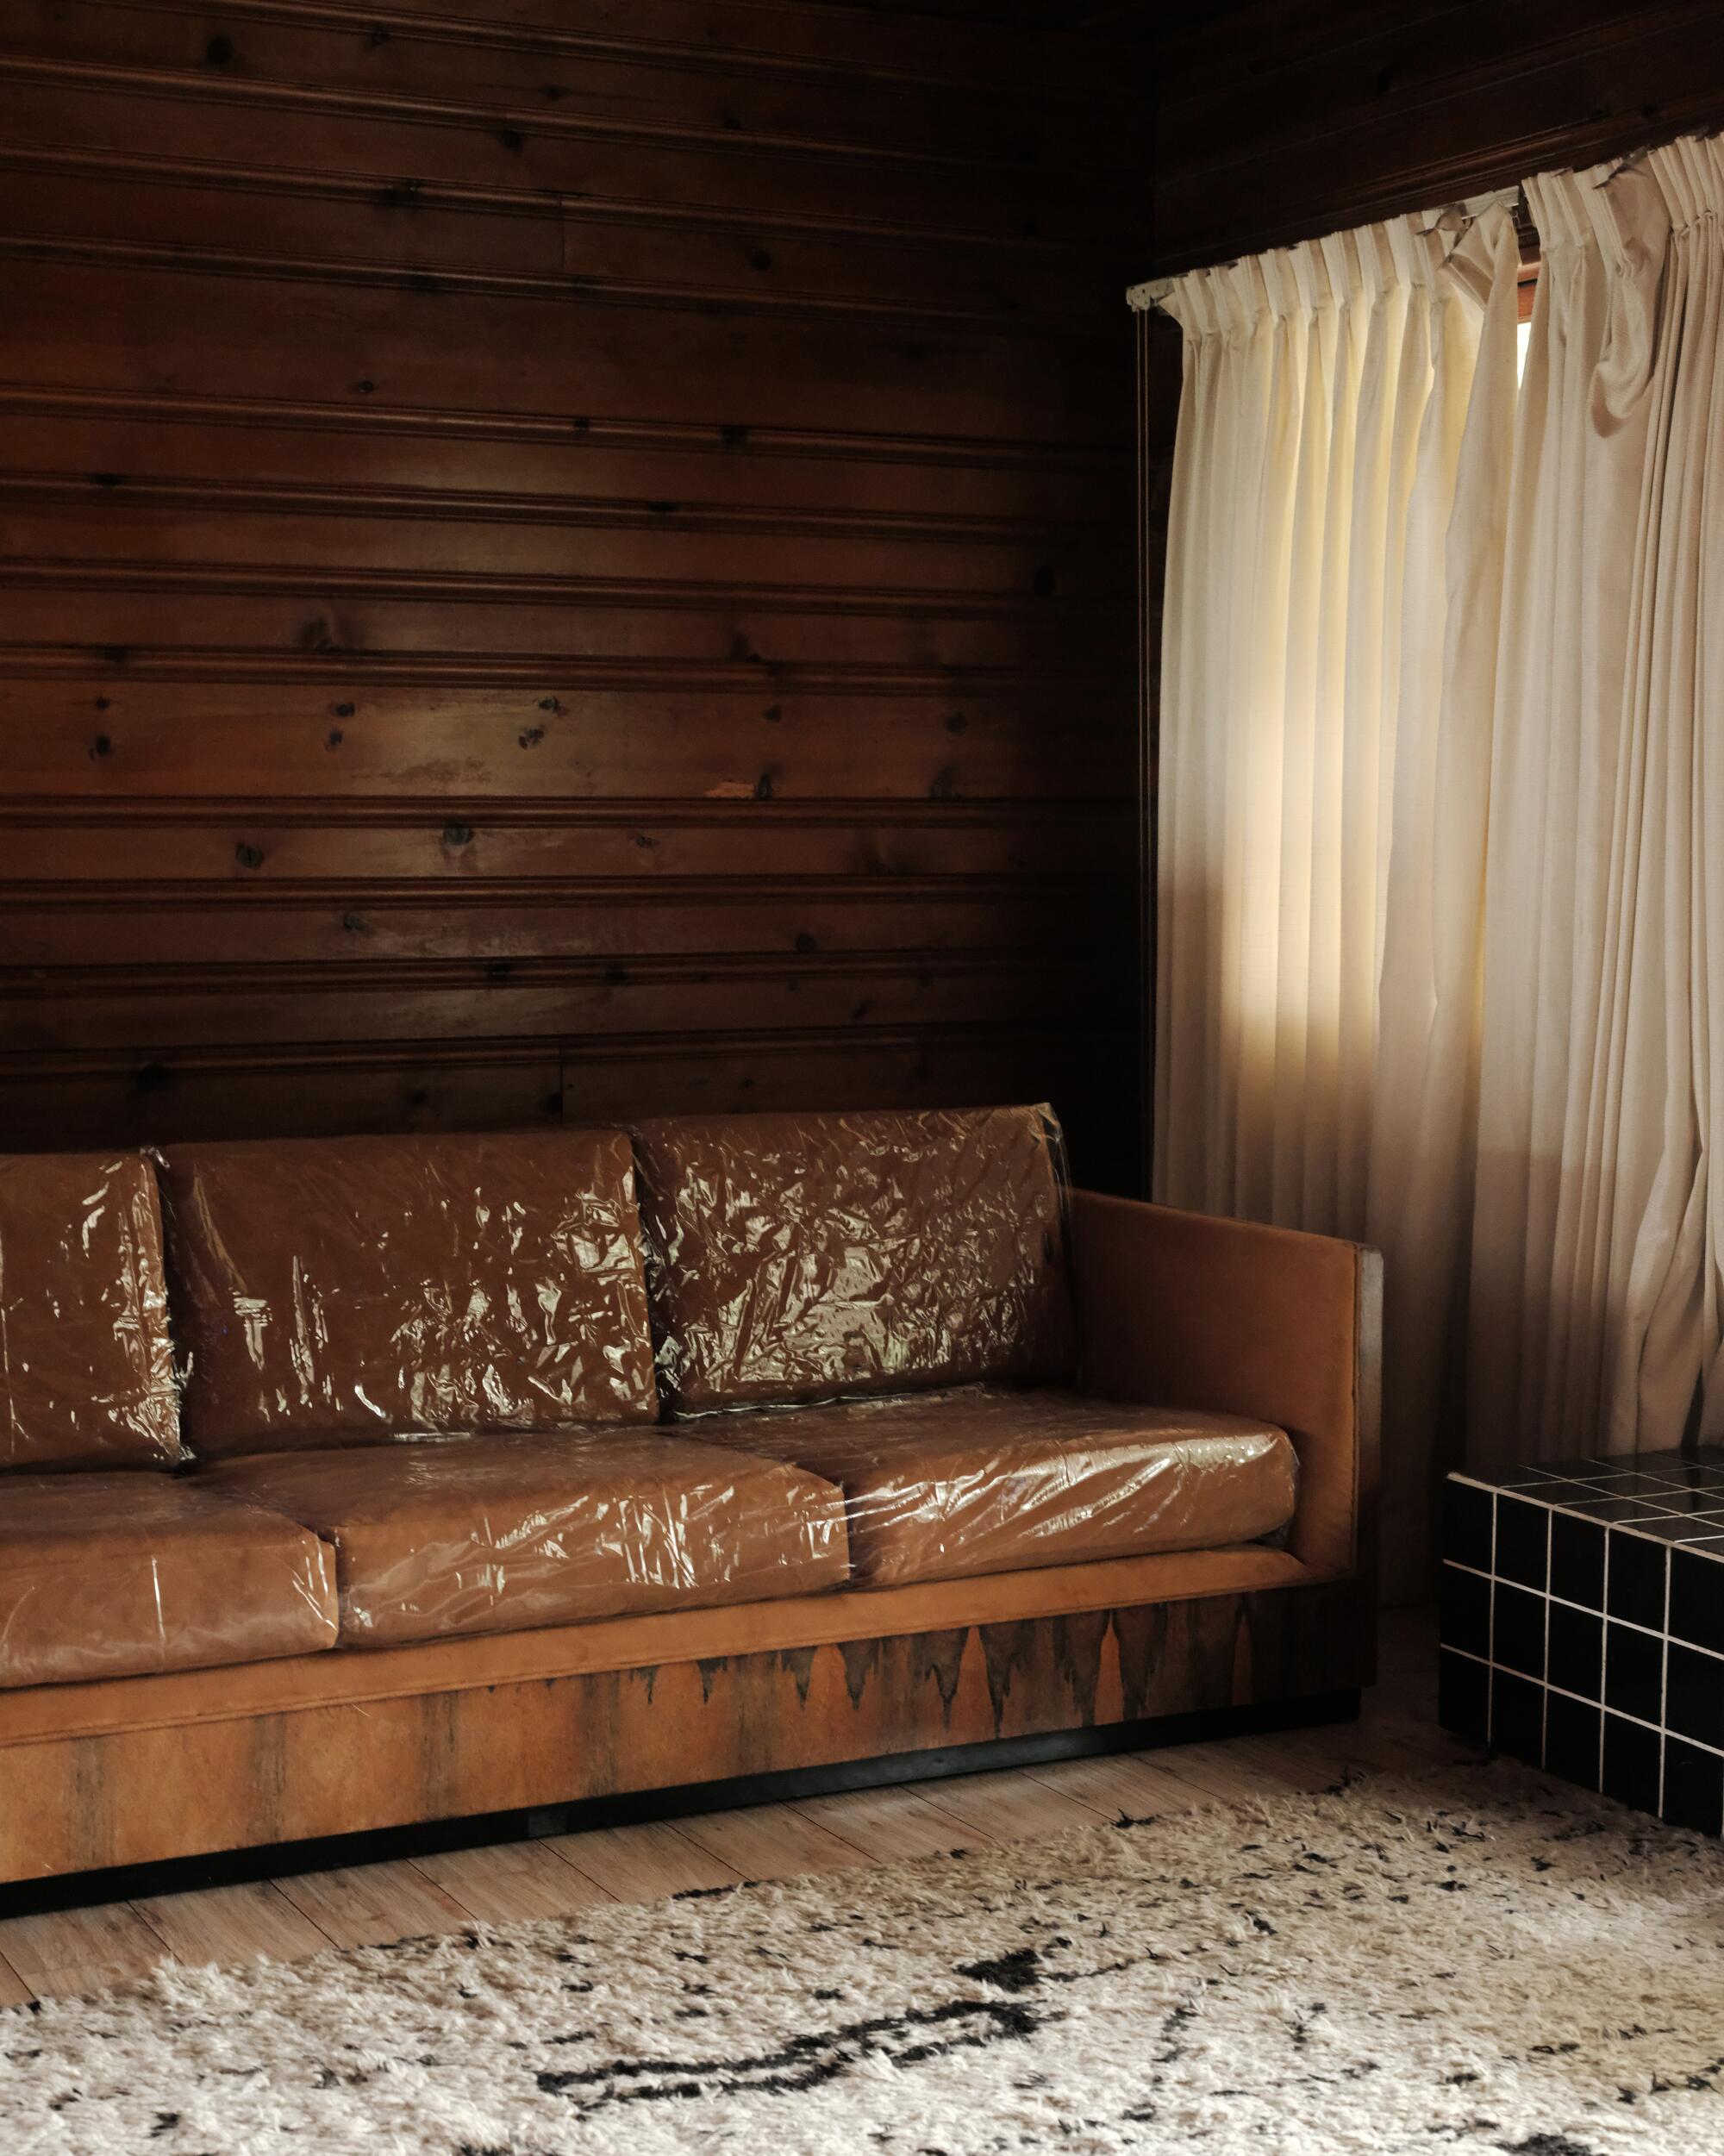 A photo of a plastic-covered brown couch, a wooden wall and white curtains in the background.